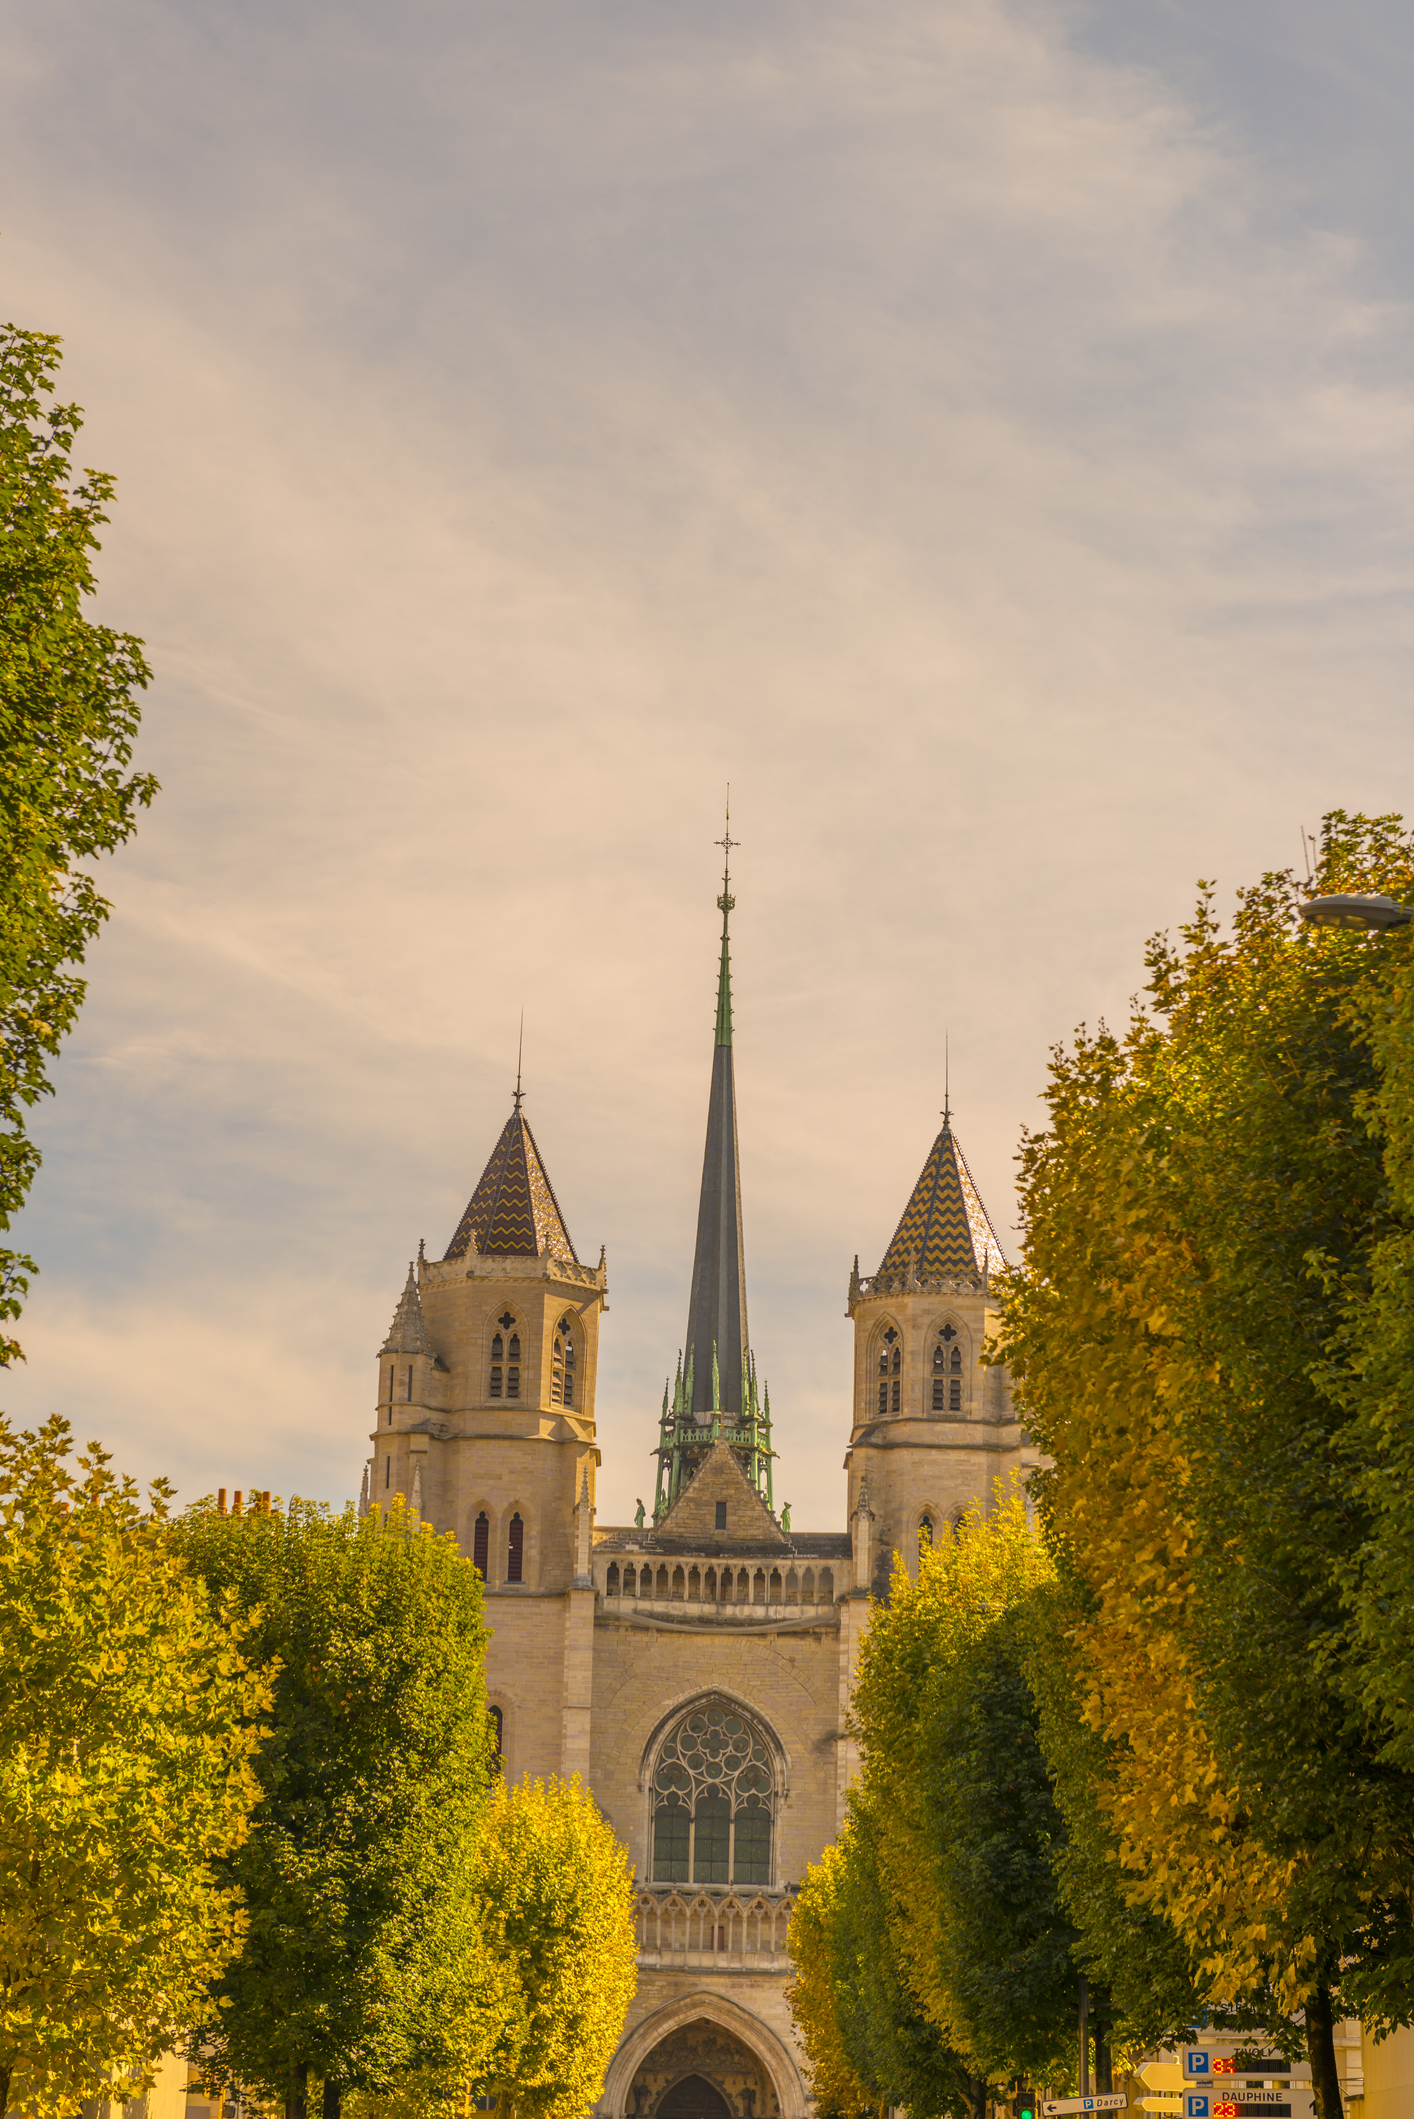 Gothic cathedral with spire between trees under a sunset sky